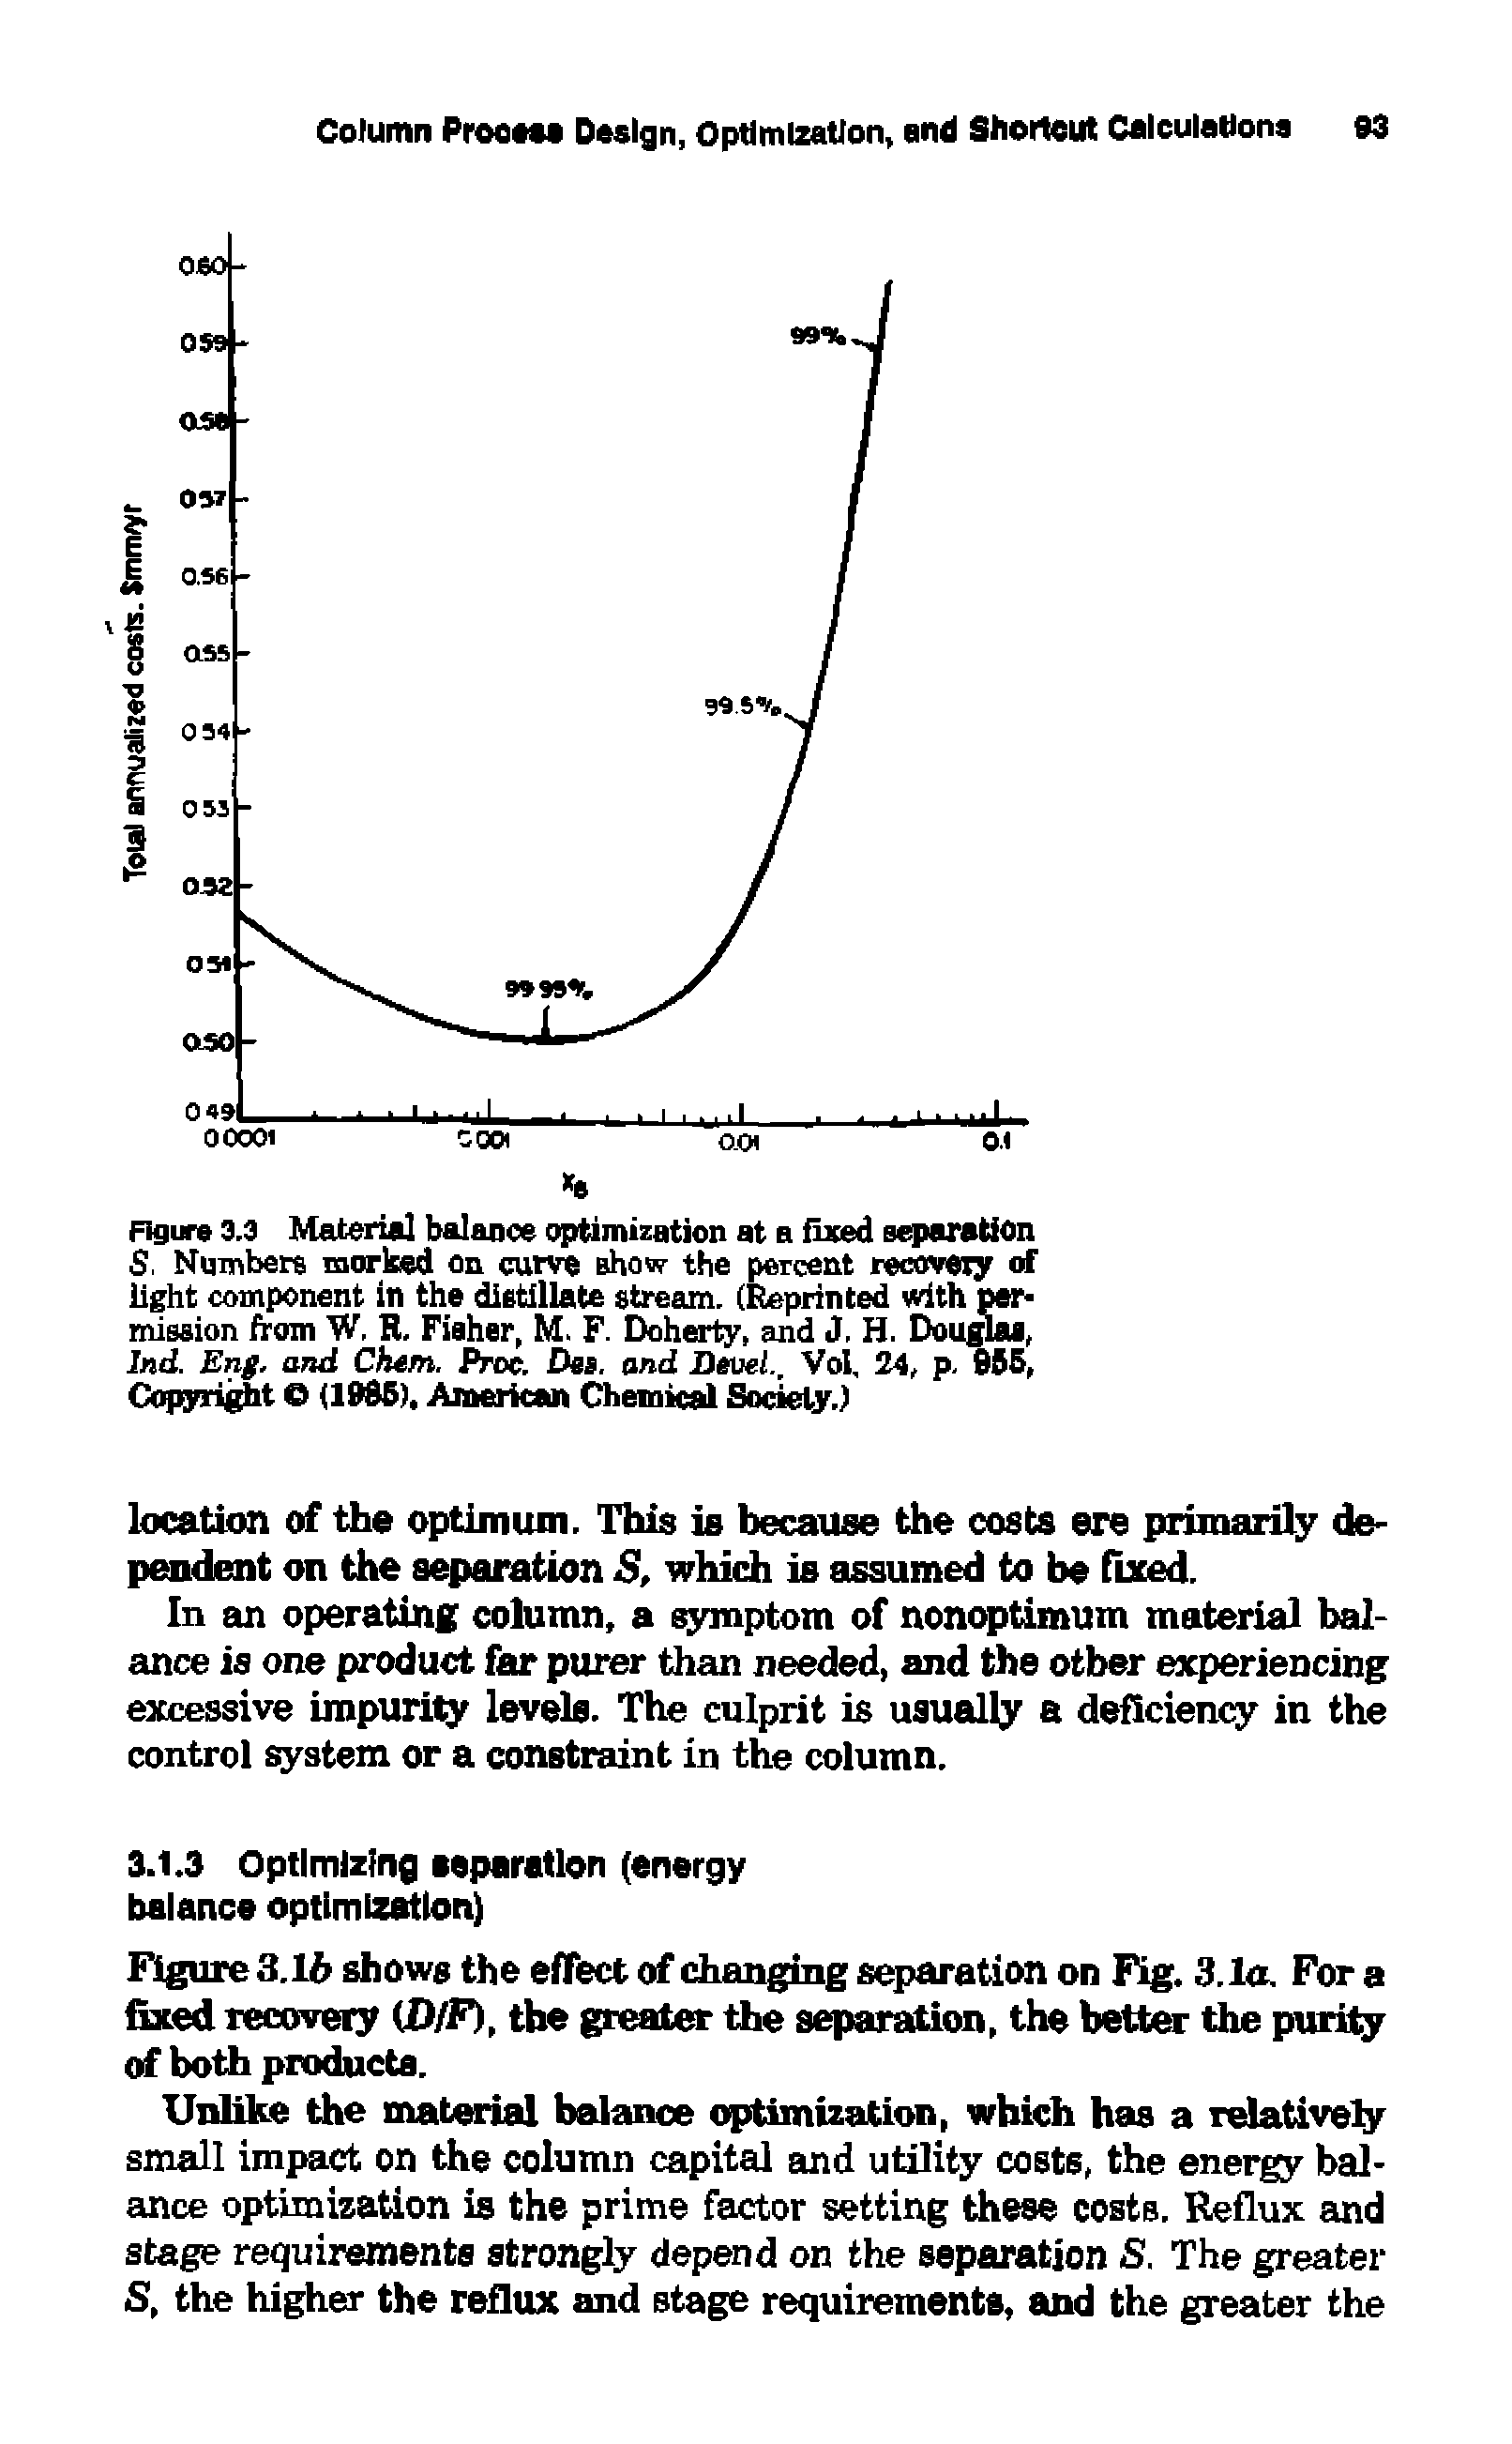 Figure 3.3 Material balance optimization at a fixed separation S, Numbers marked on curve show the percent recovery of light component in the distillate stream. (Reprinted with permission from W, R, Fiaher, M. F. Doherty, and J. H. Douglas, Ind. Eng. and Chan. Proc. Deg. and Deuel., Vol, 24, p. 805, Copyright (1985), American Chemical Society.)...